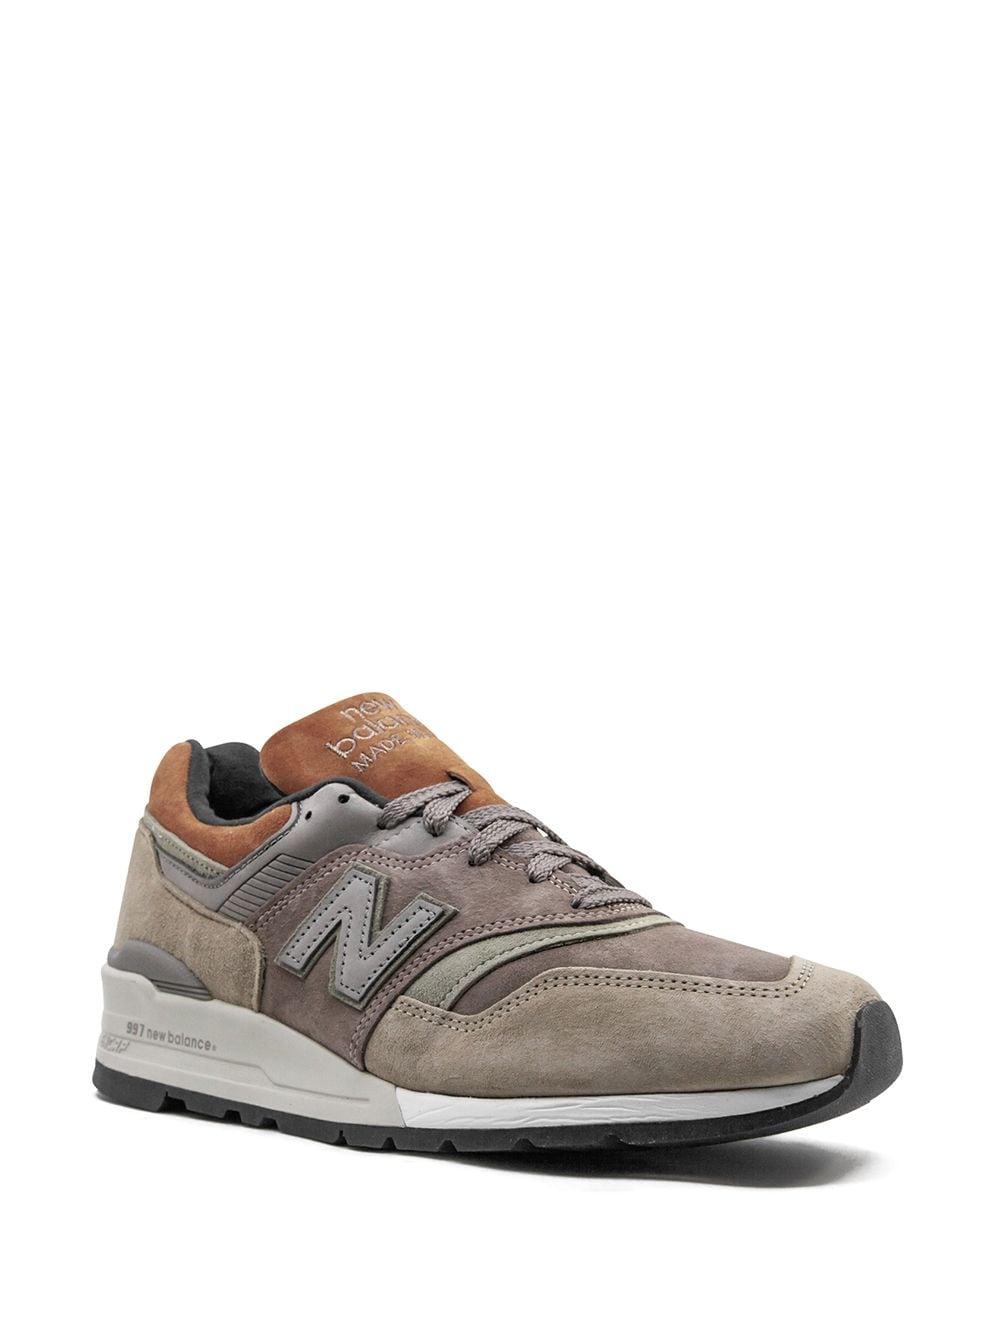 New Balance Suede 997 Made In Usa 'earth Tones' Sneakers for Men - Lyst